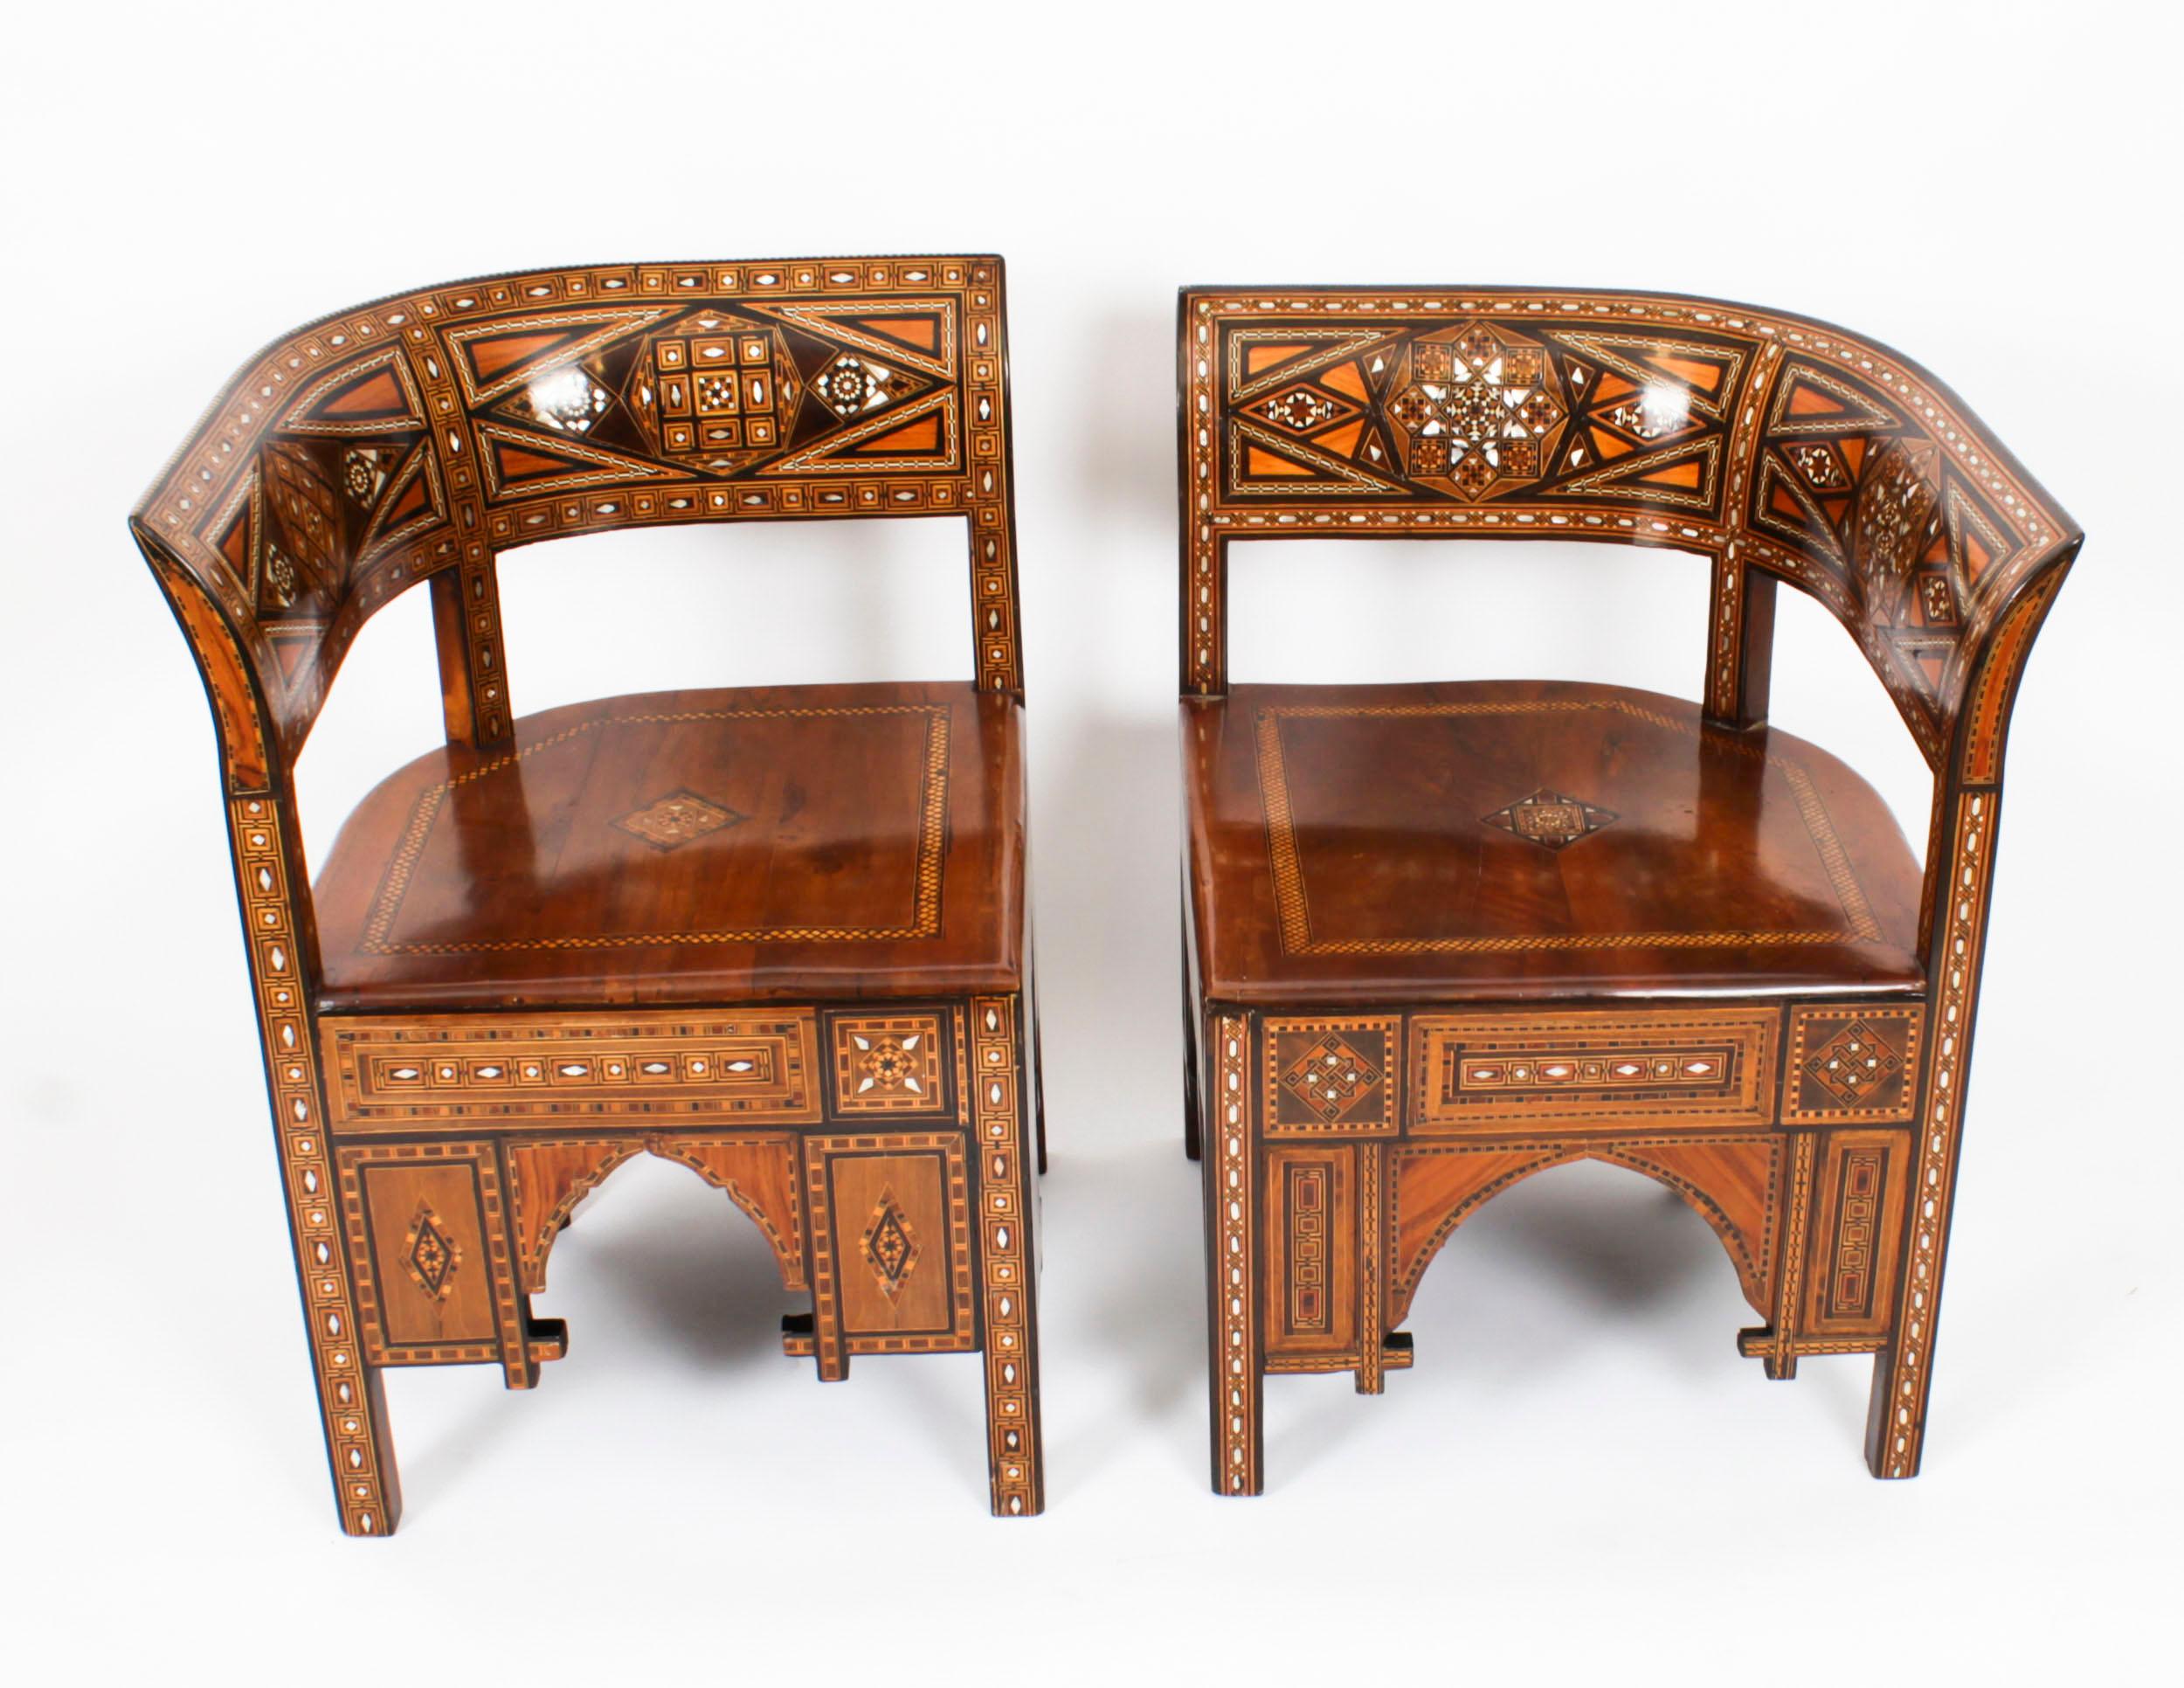 Antique Set of 4 Syrian Parquetry Inlaid Armchairs, Early 20th Century In Good Condition For Sale In London, GB